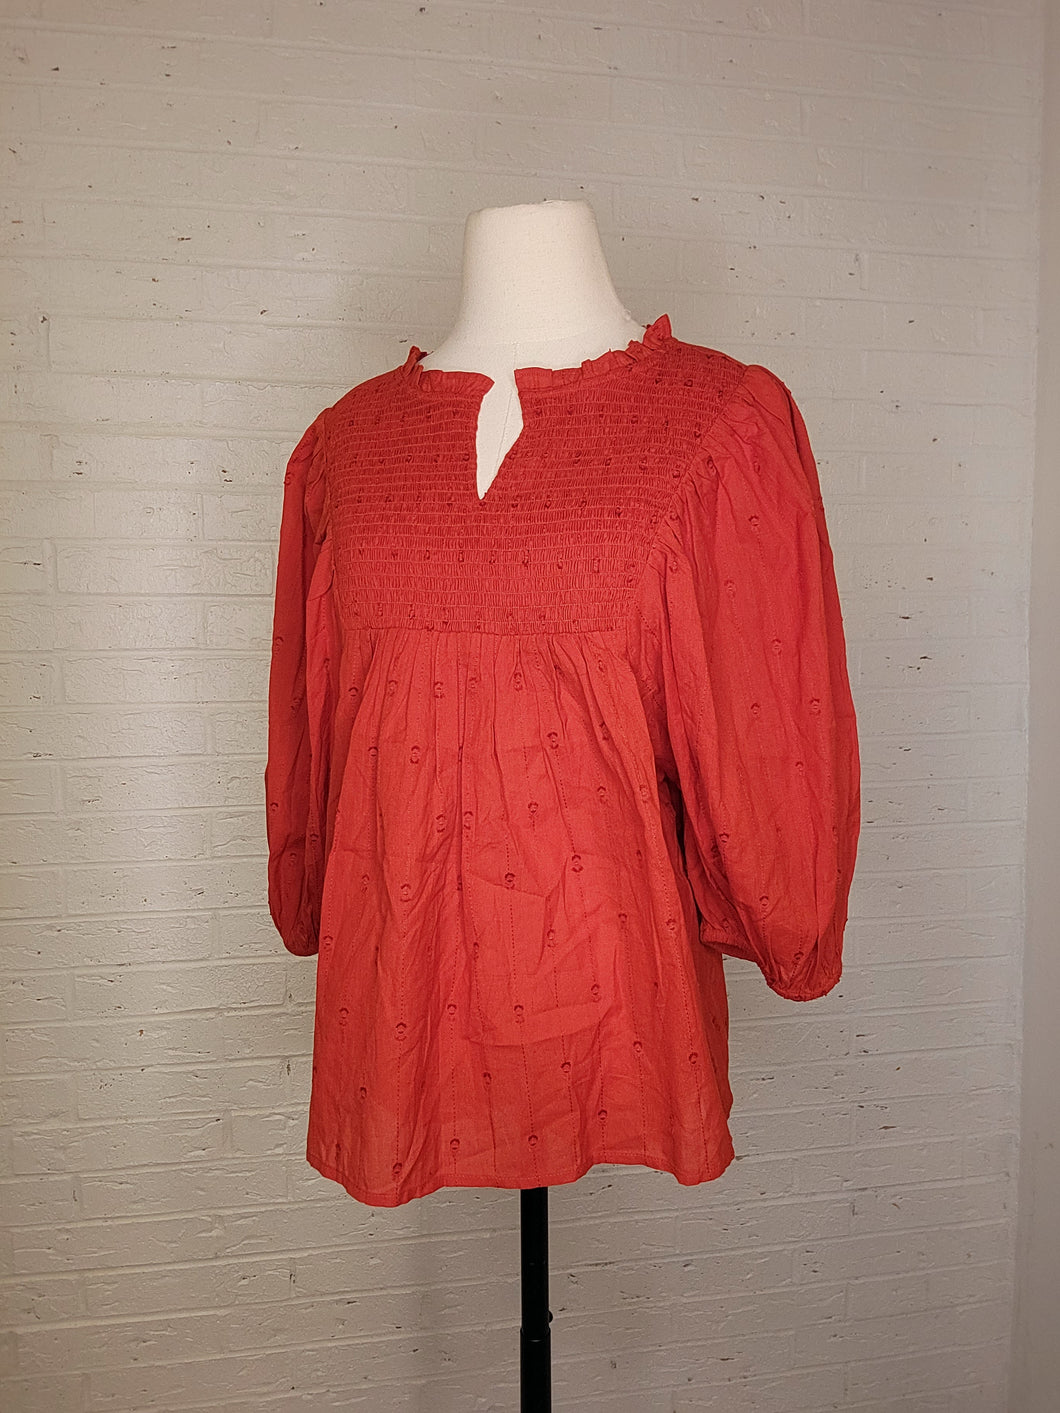 S - Universal Thread Red Blouse NWT